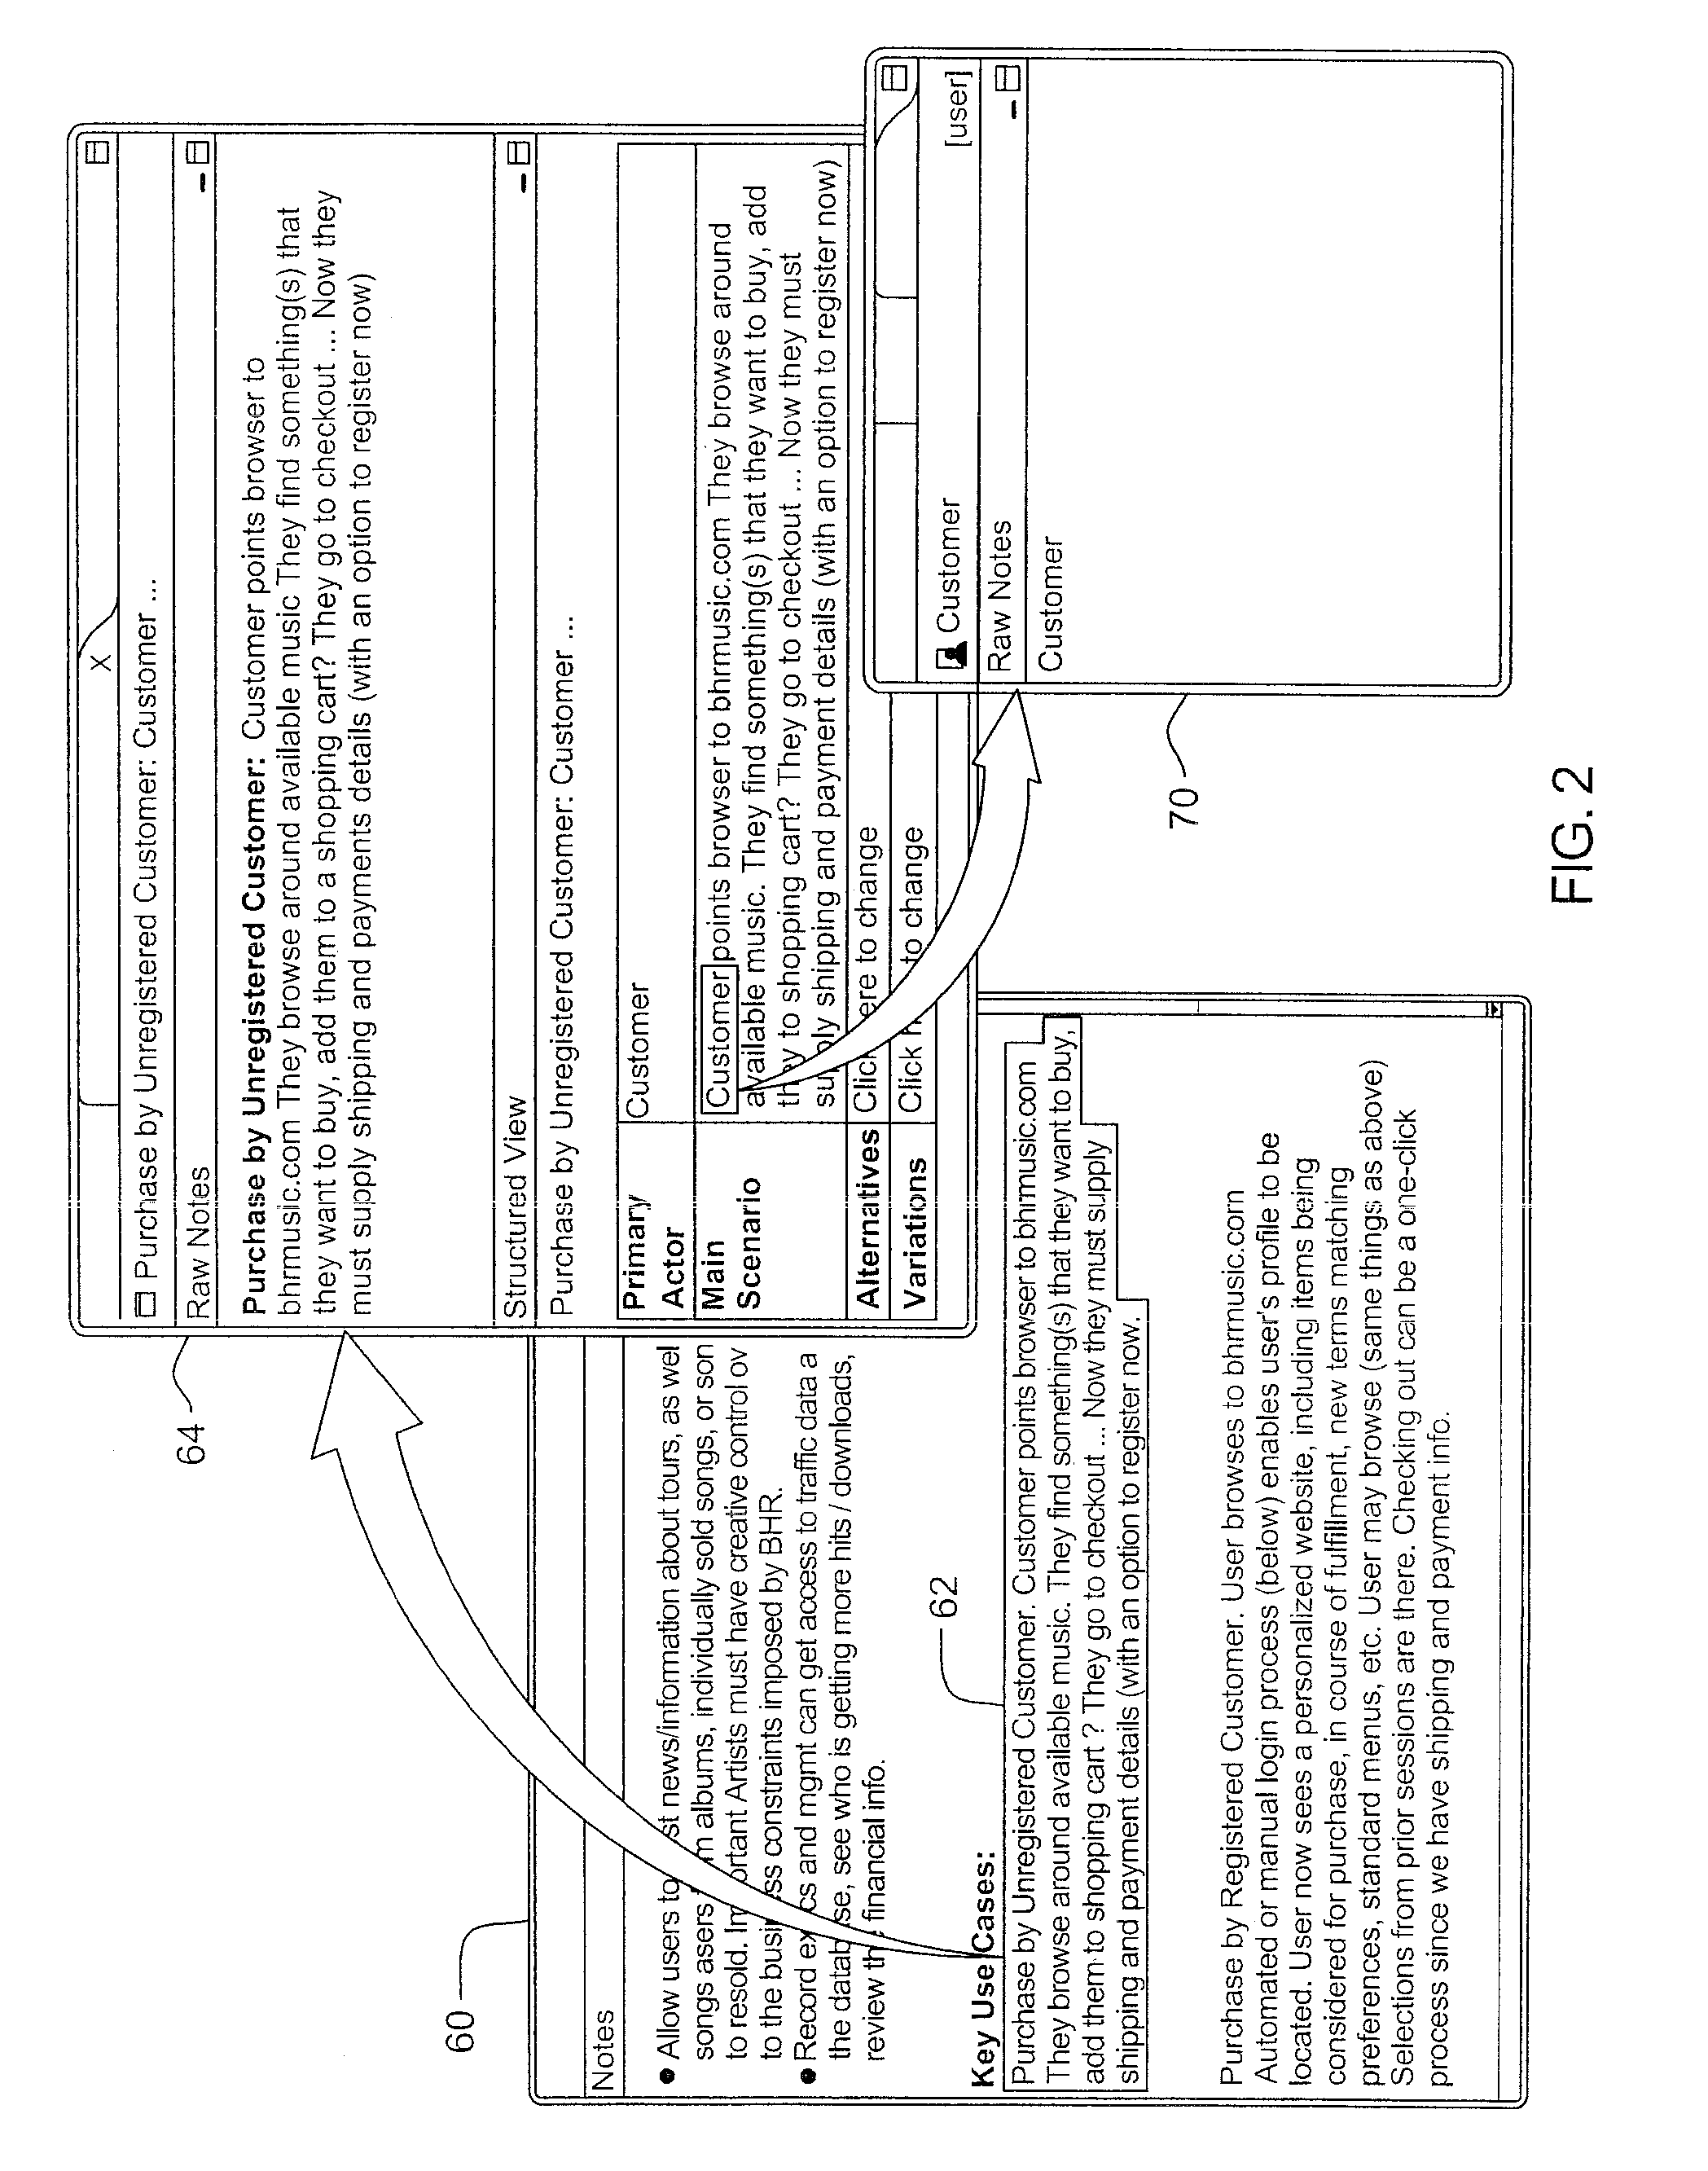 Method and system for creating semantic relationships using hyperlinks